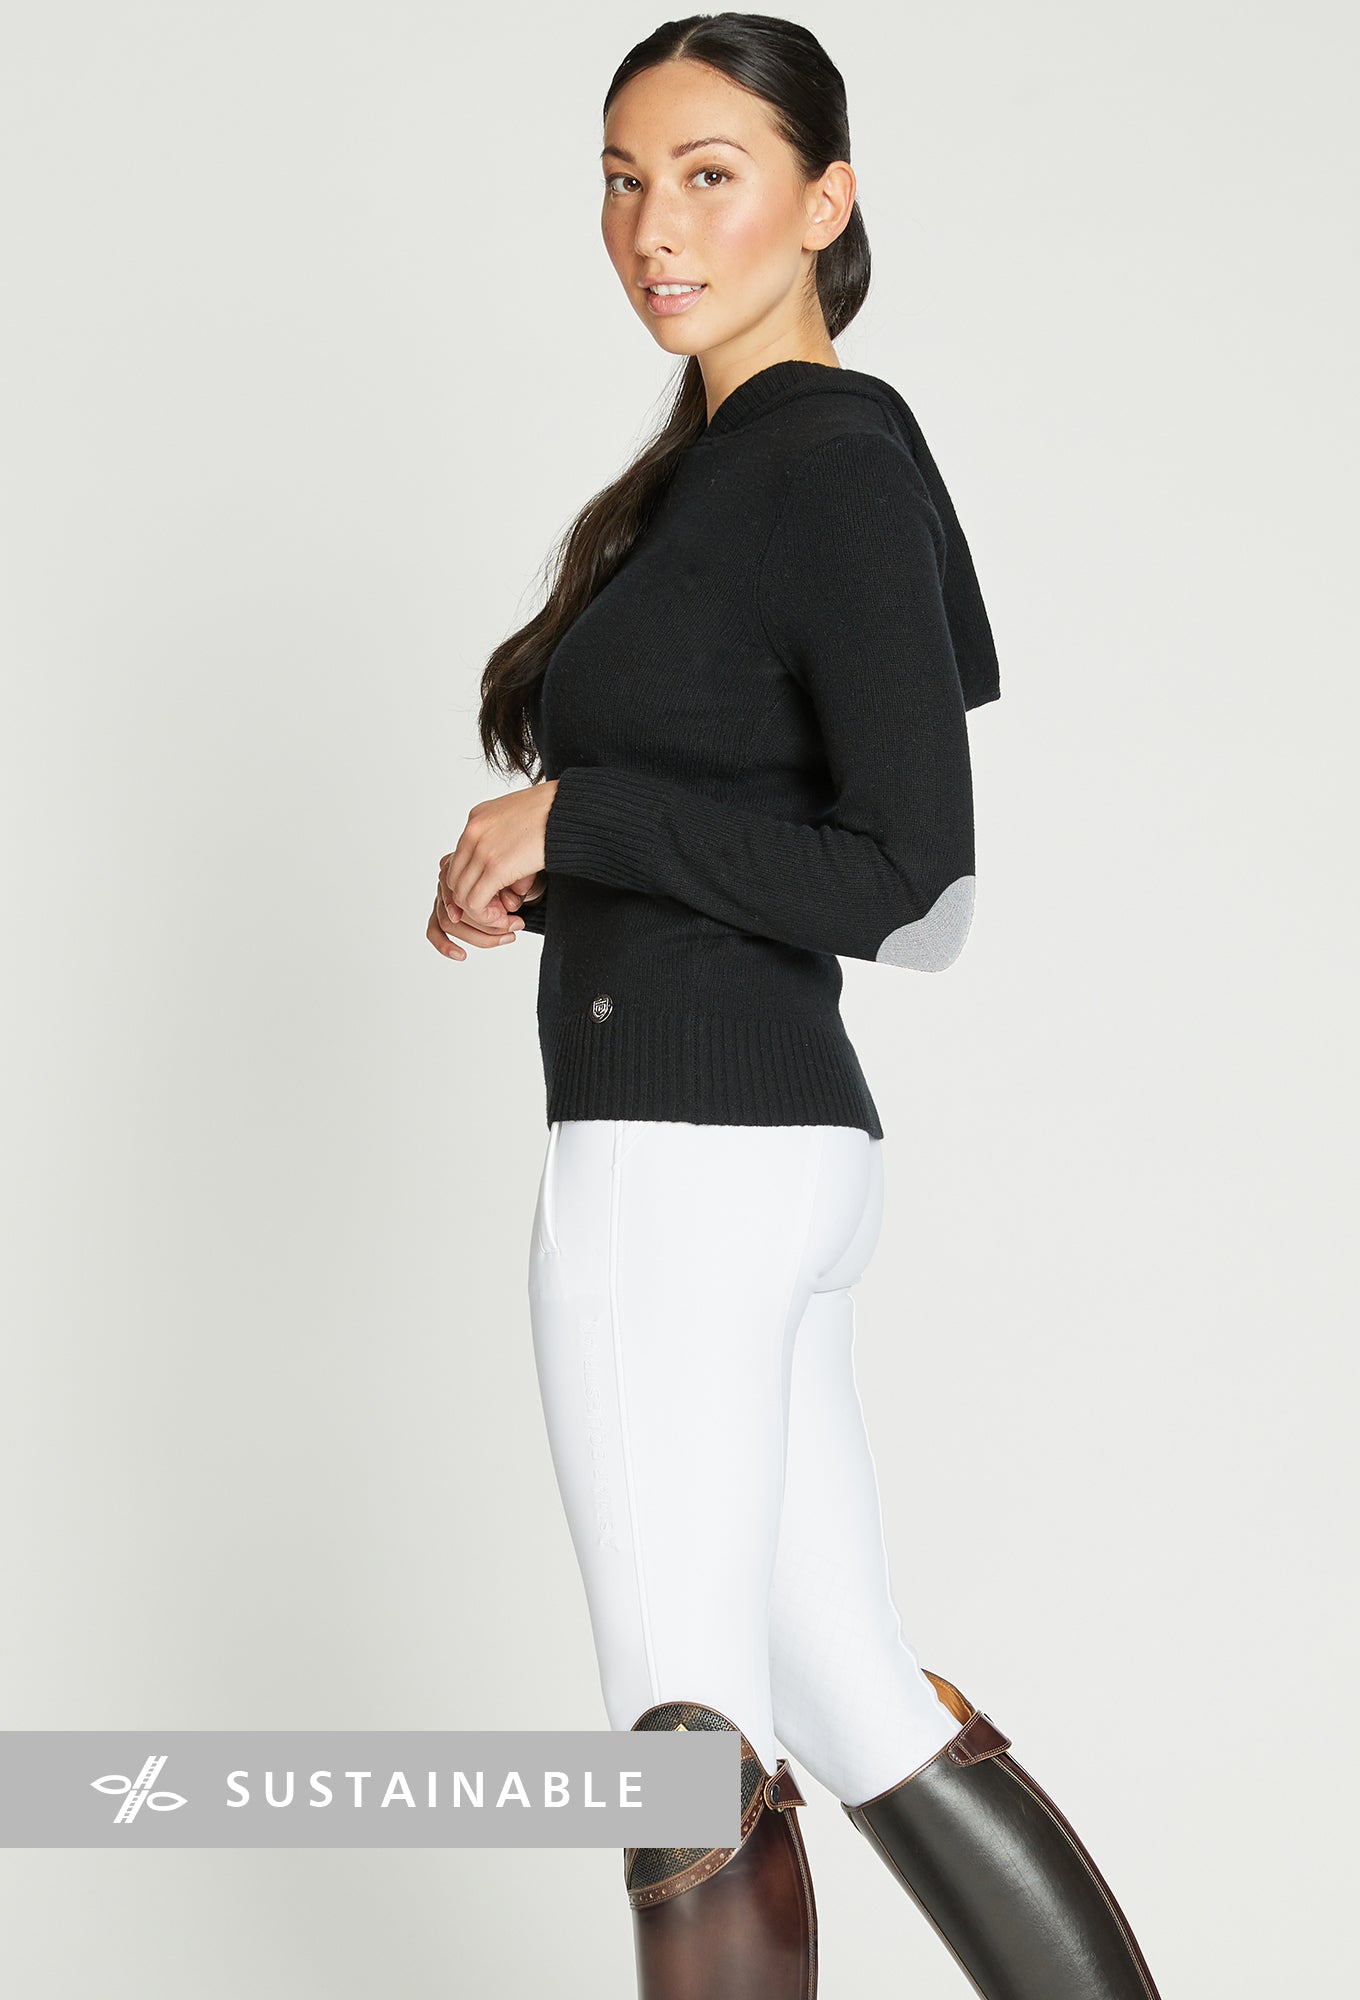 Woman wearing a black knit sweater and white riding leggings.